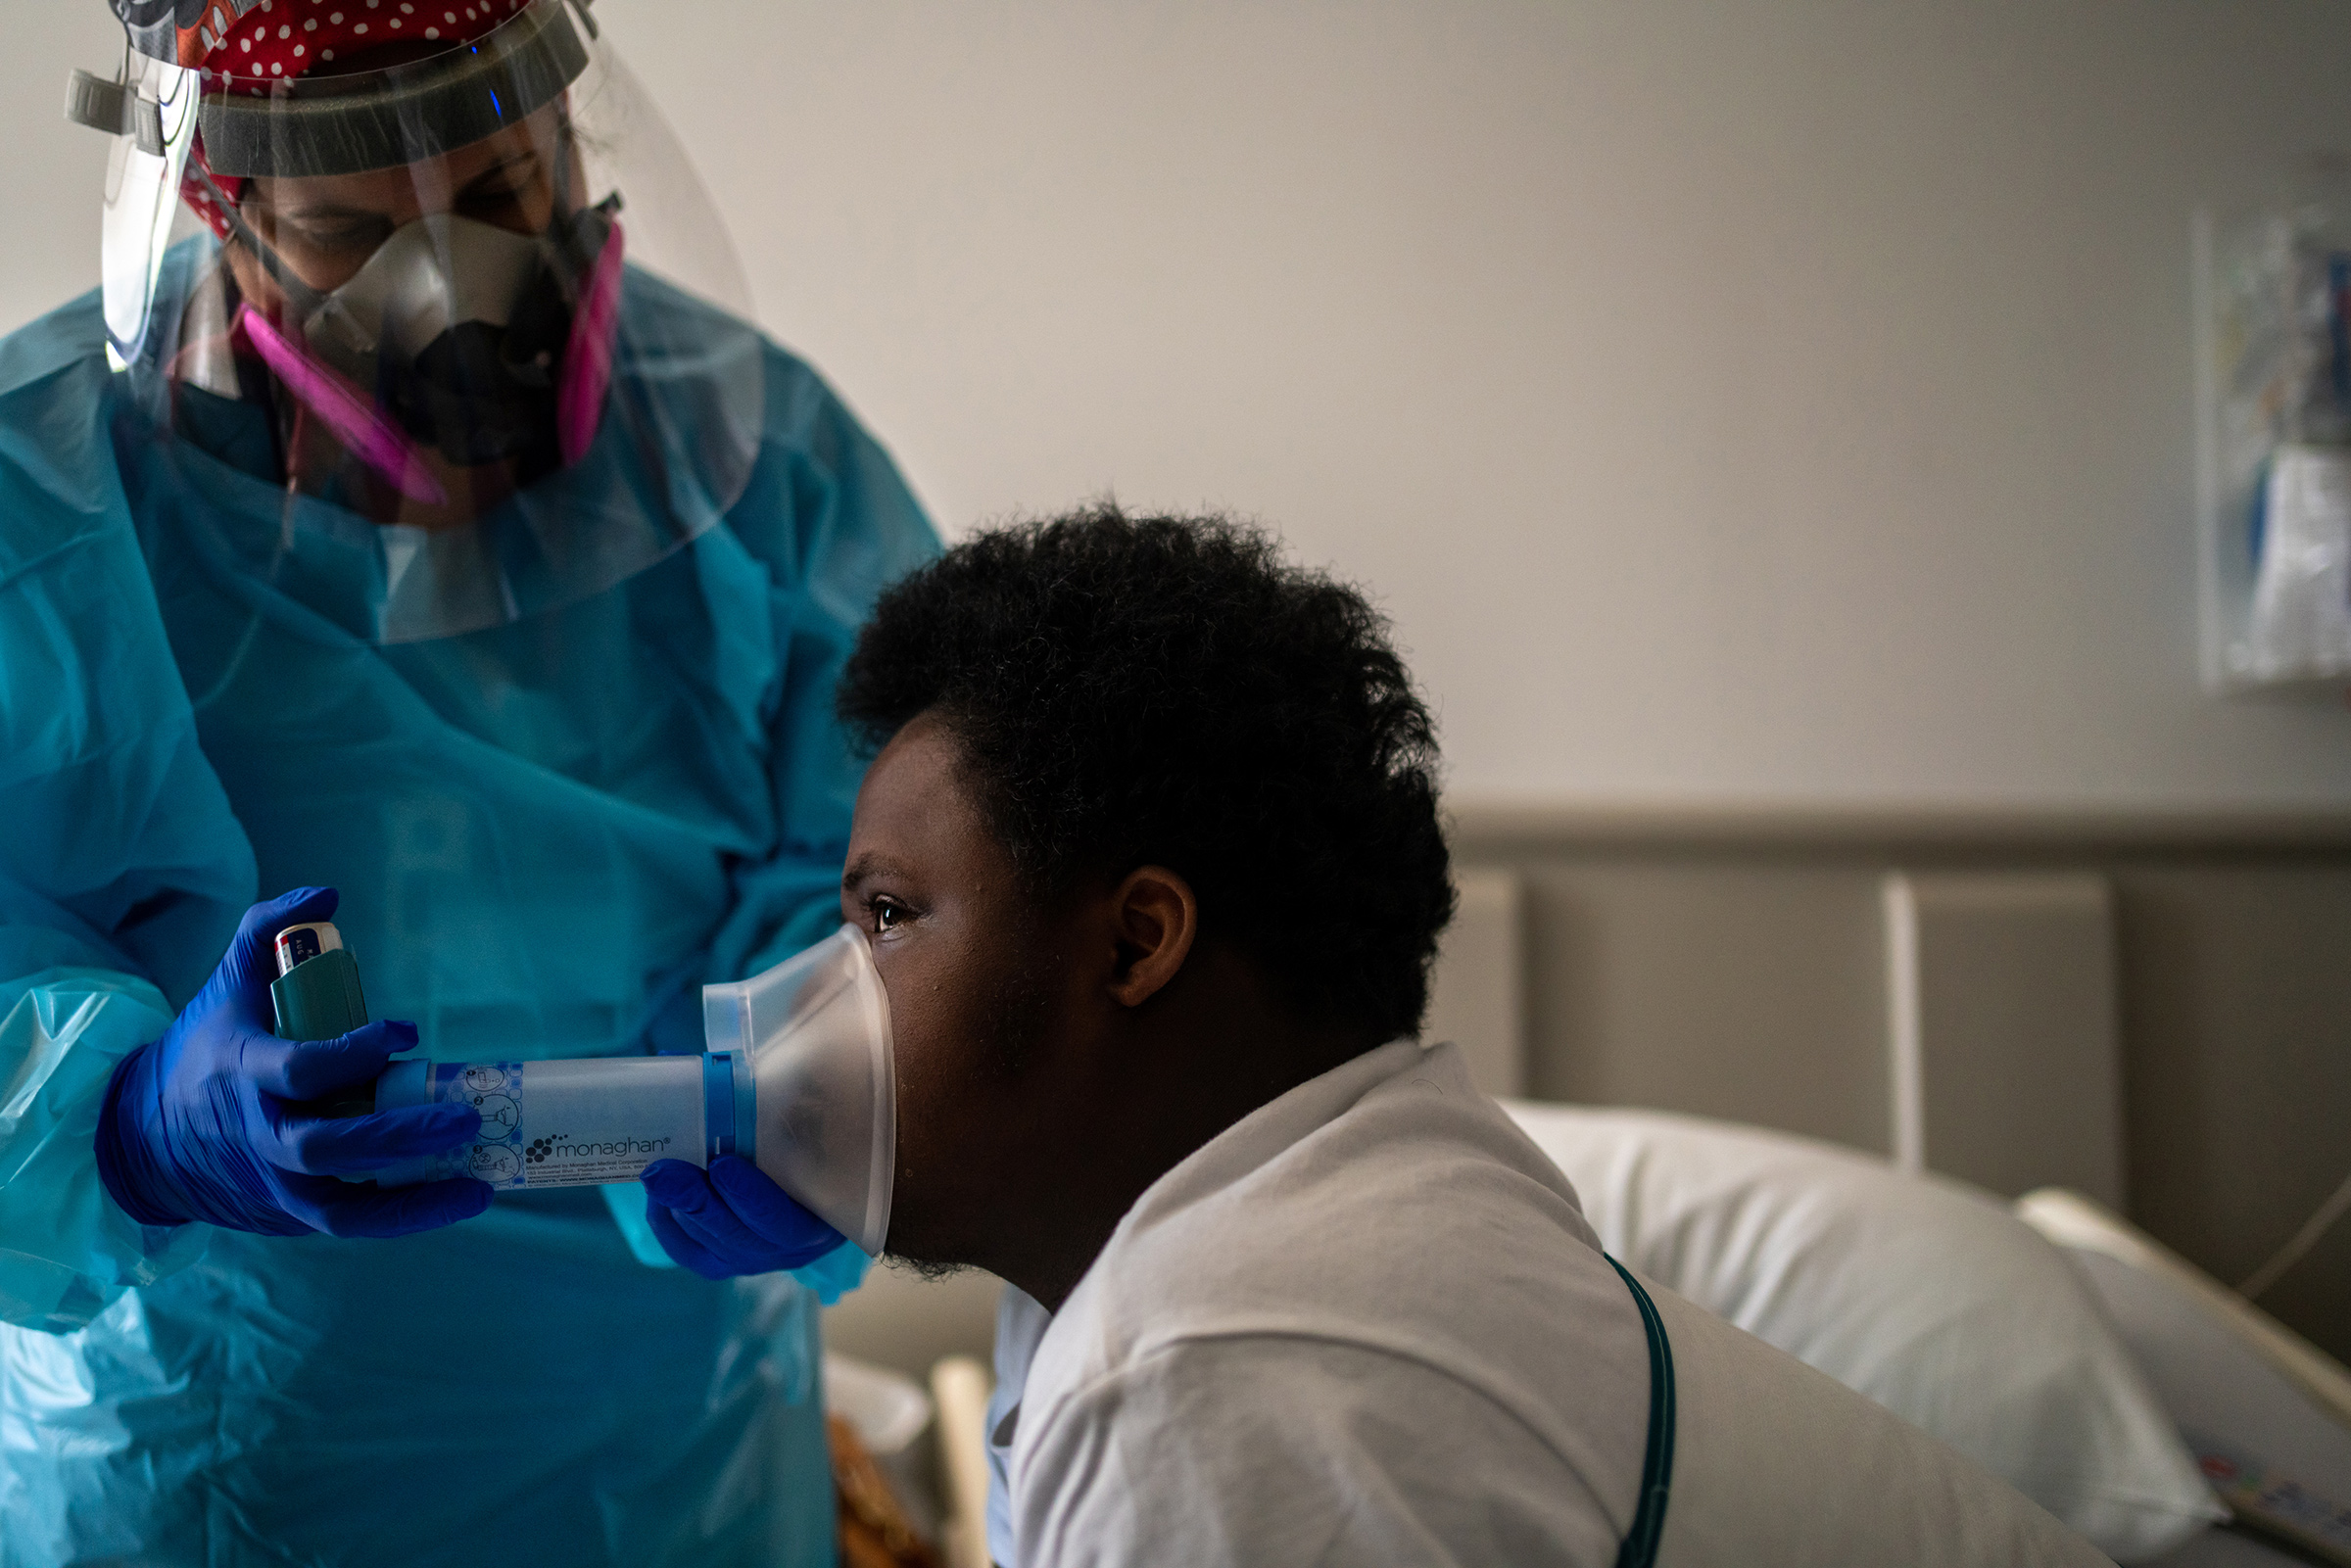 Courtney Willis provides respiration therapy to Nelson Alexis III, 17, in his room at Children’s Hospital New Orleans. Nelson, who has Down syndrome, was diagnosed with the virus in late July.